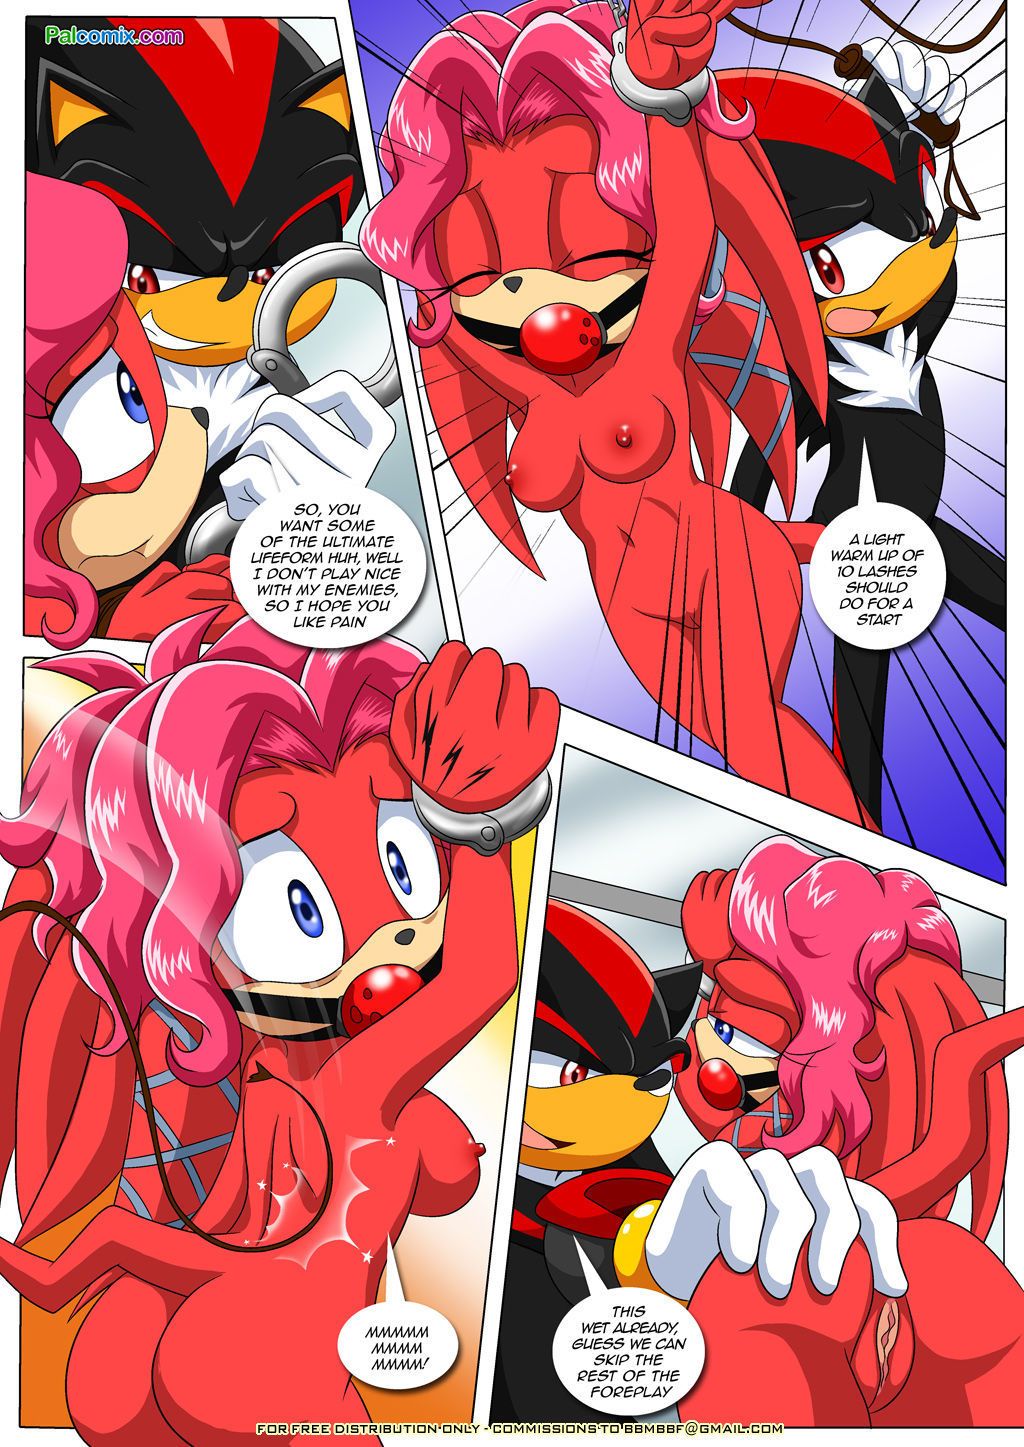 Mobius Unleashed (Palcomix) Lien-da\'s Lucky Night (Sonic The Hedgehog)